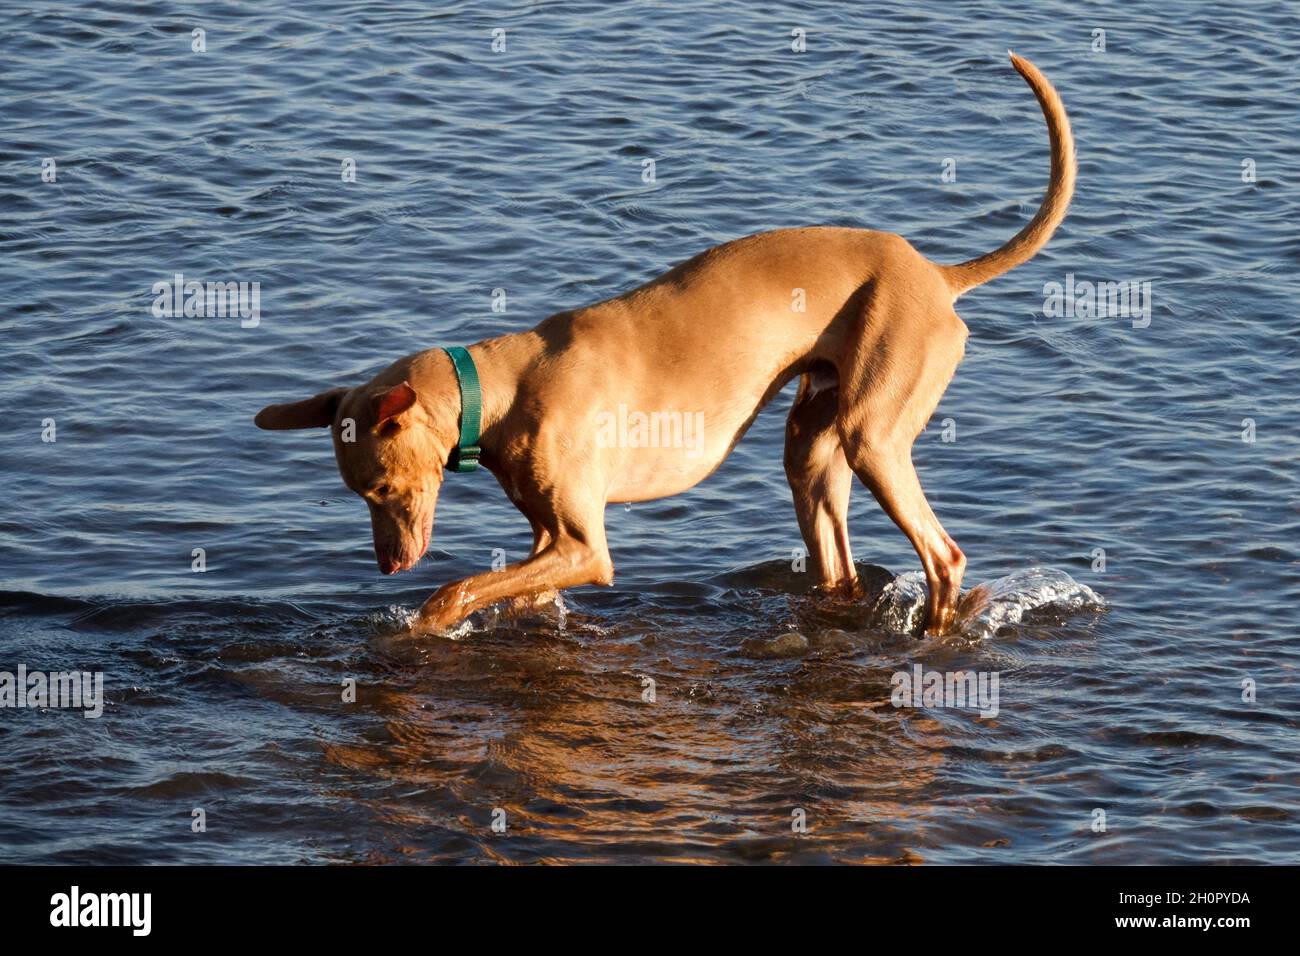 Dog in water playing Stock Photo